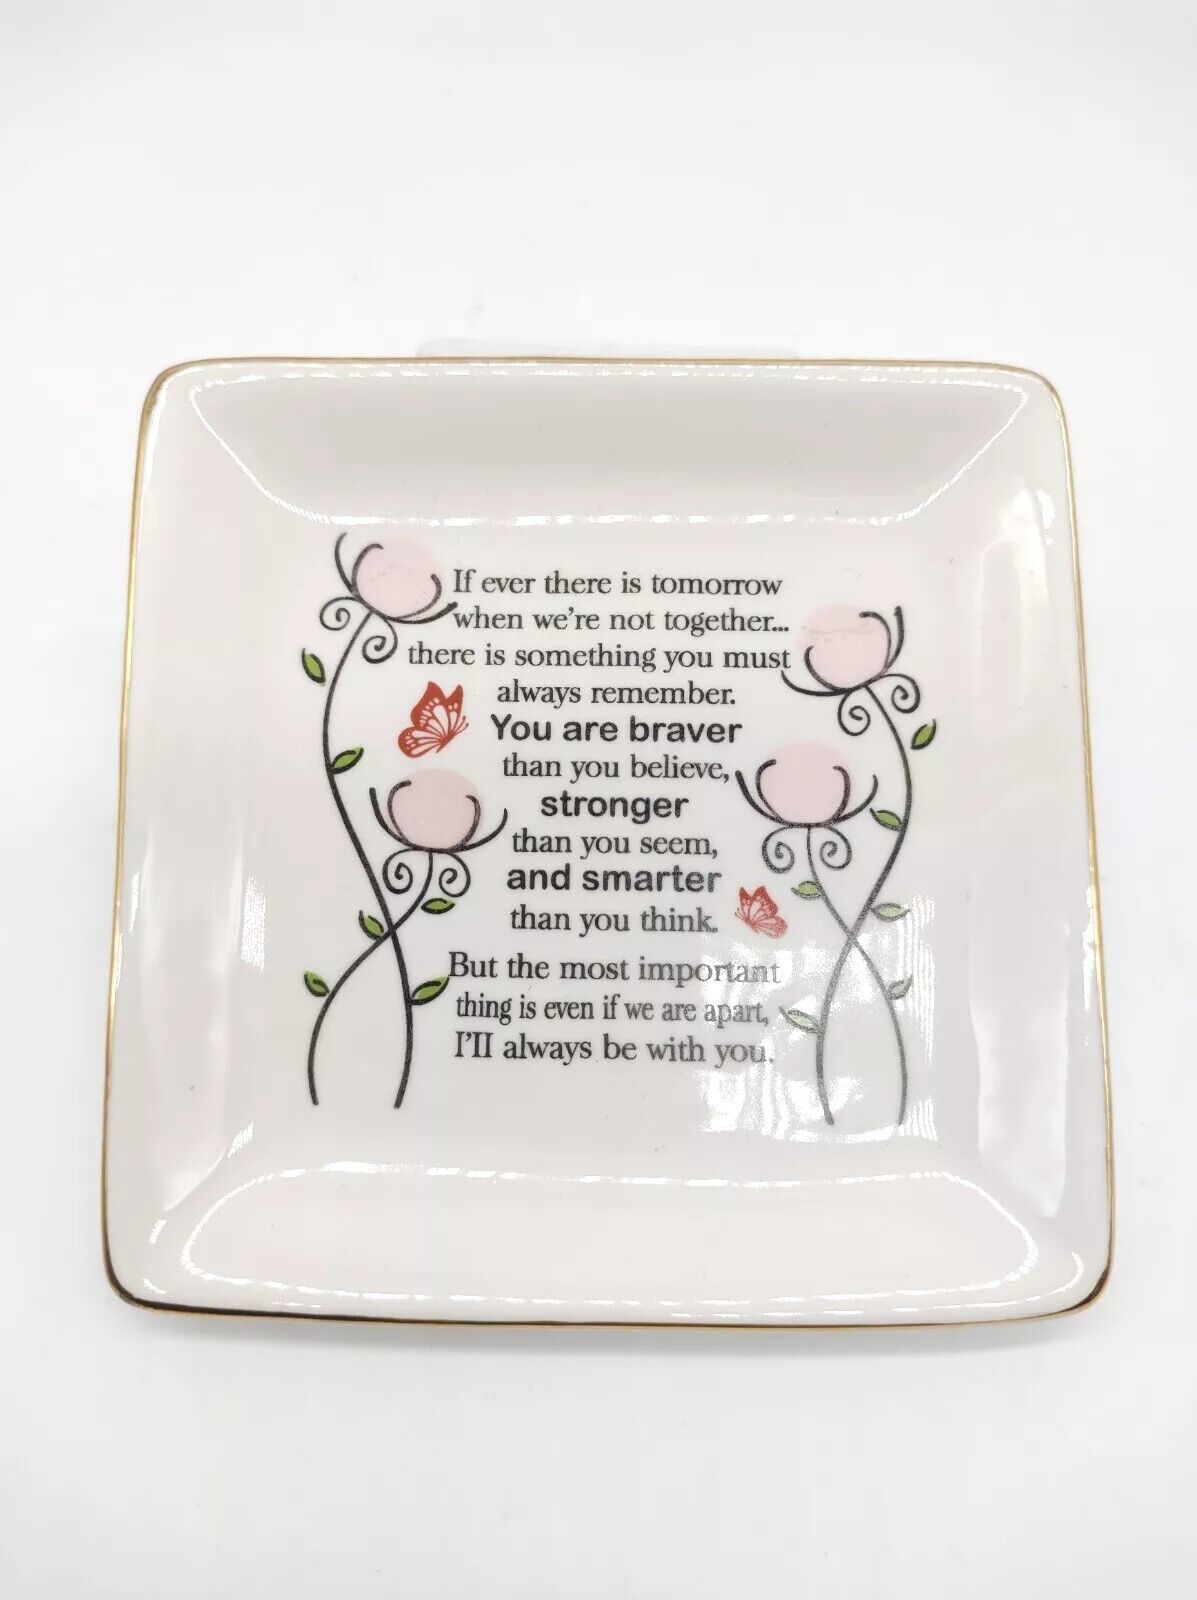 I'll Always Be With You Trinket Jewelry Dish Gift 